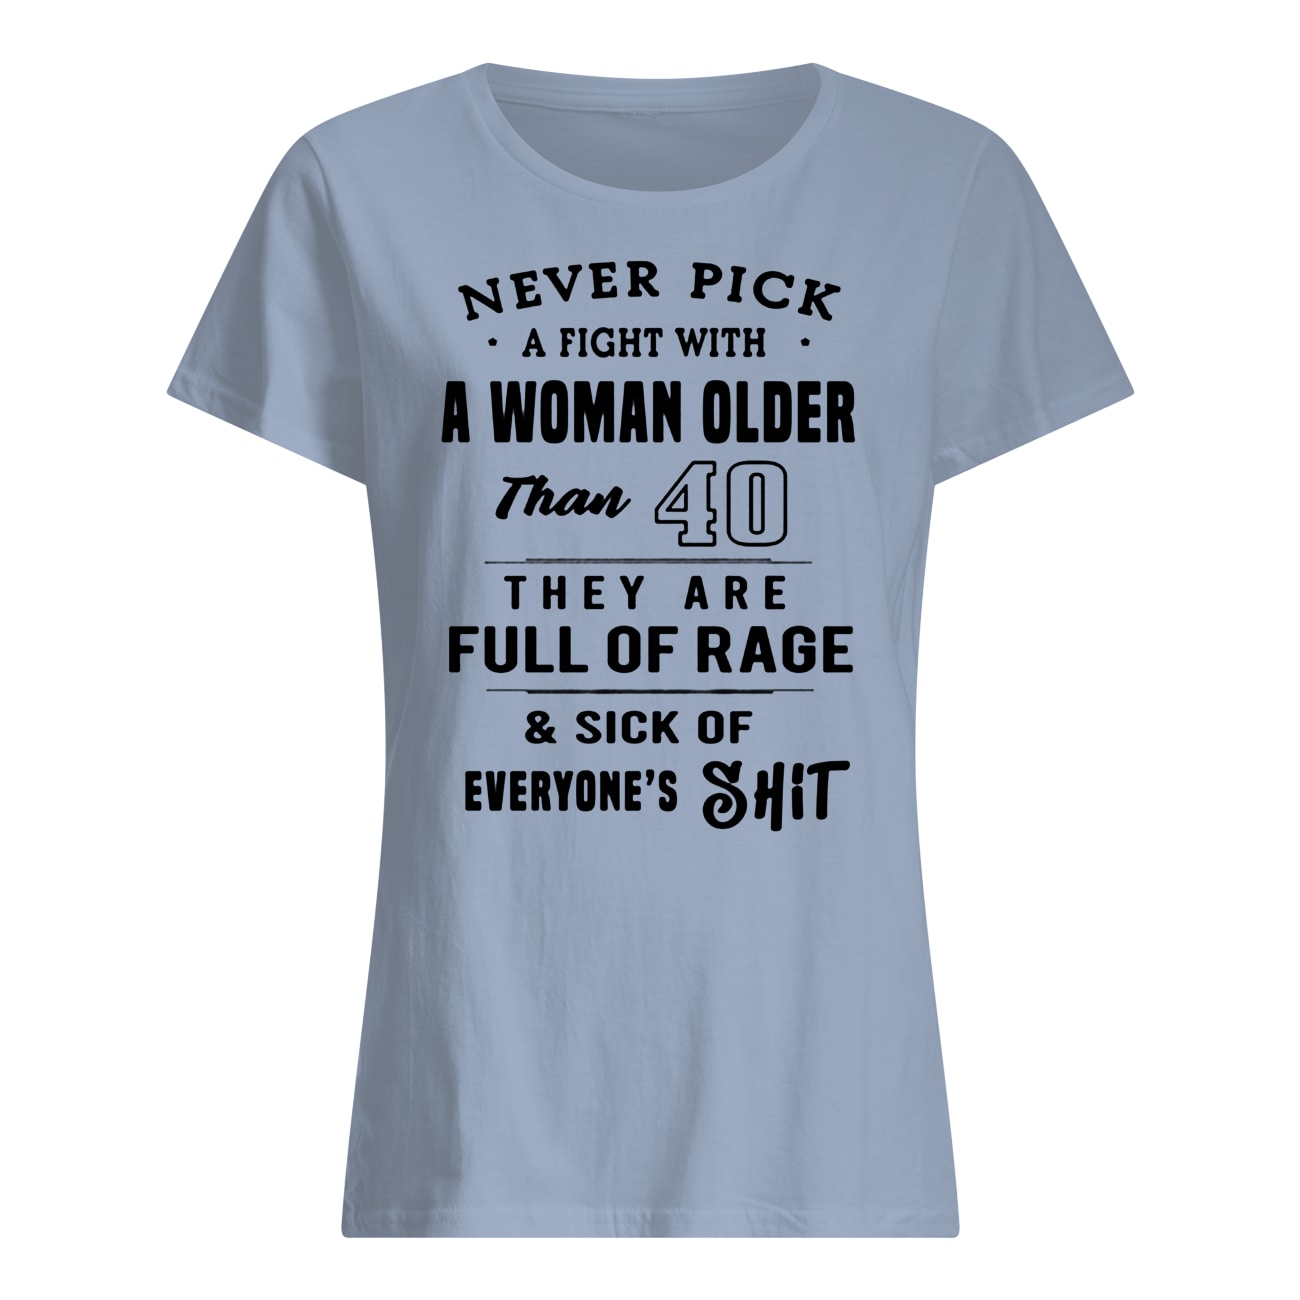 Never pick a fight with a woman older than 40 they are full of rage womens shirt